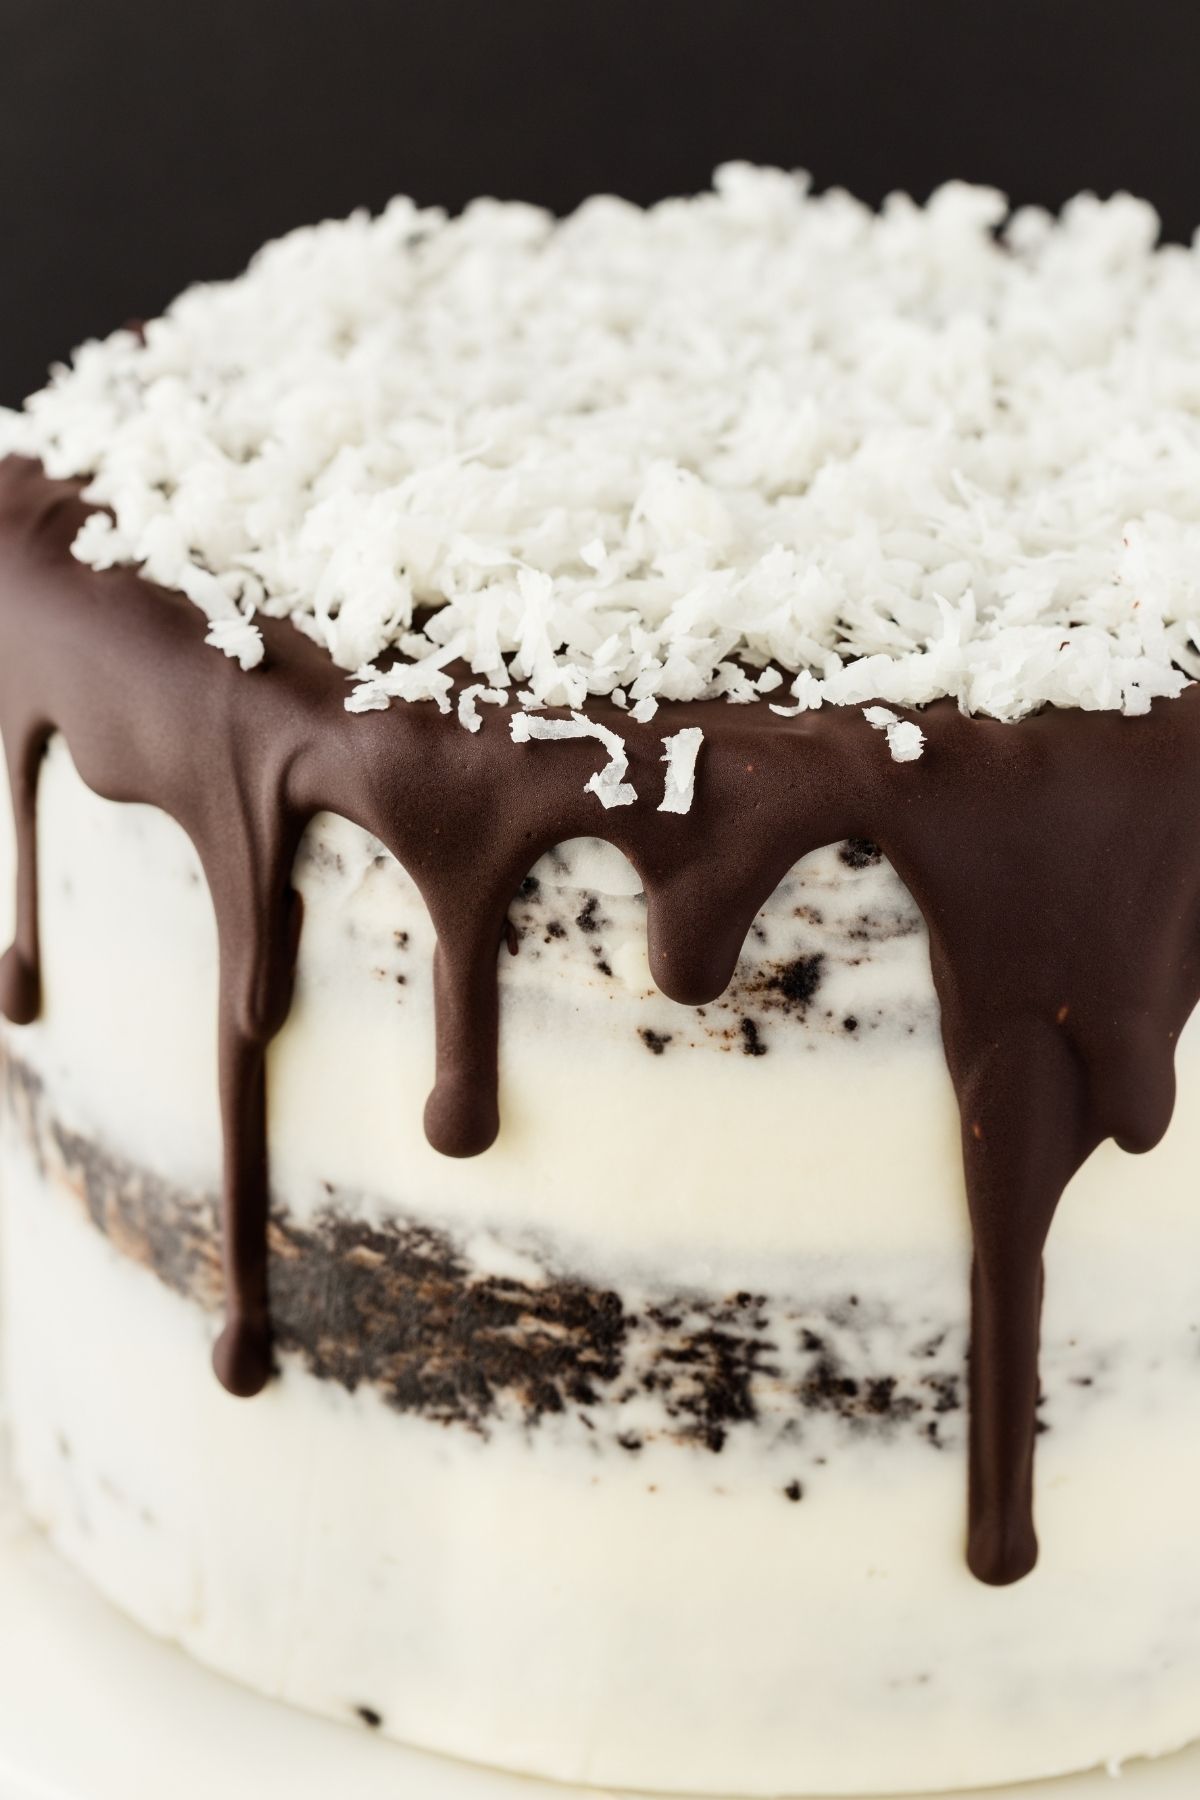 Up close view of chocolate coconut cake.